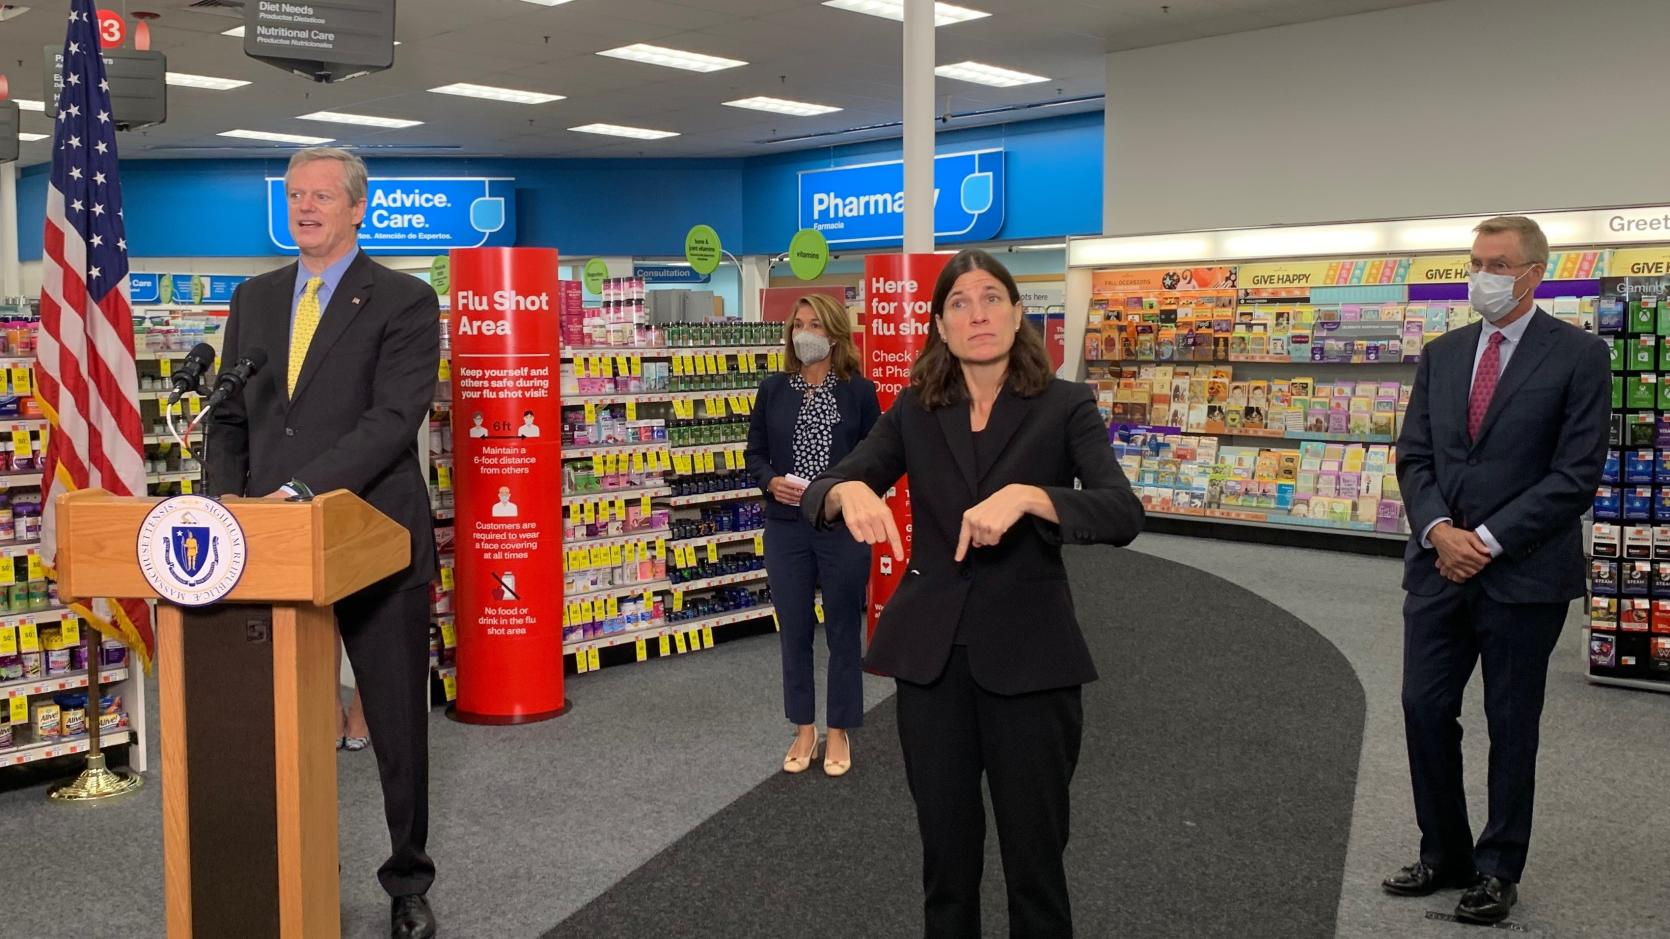 Today Governor Baker, Lt. Governor Polito, and Health and Human Services Secretary Marylou Sudders visited a CVS Pharmacy in Roslindale to receive flu shots and highlight the importance of getting vaccinated this year.